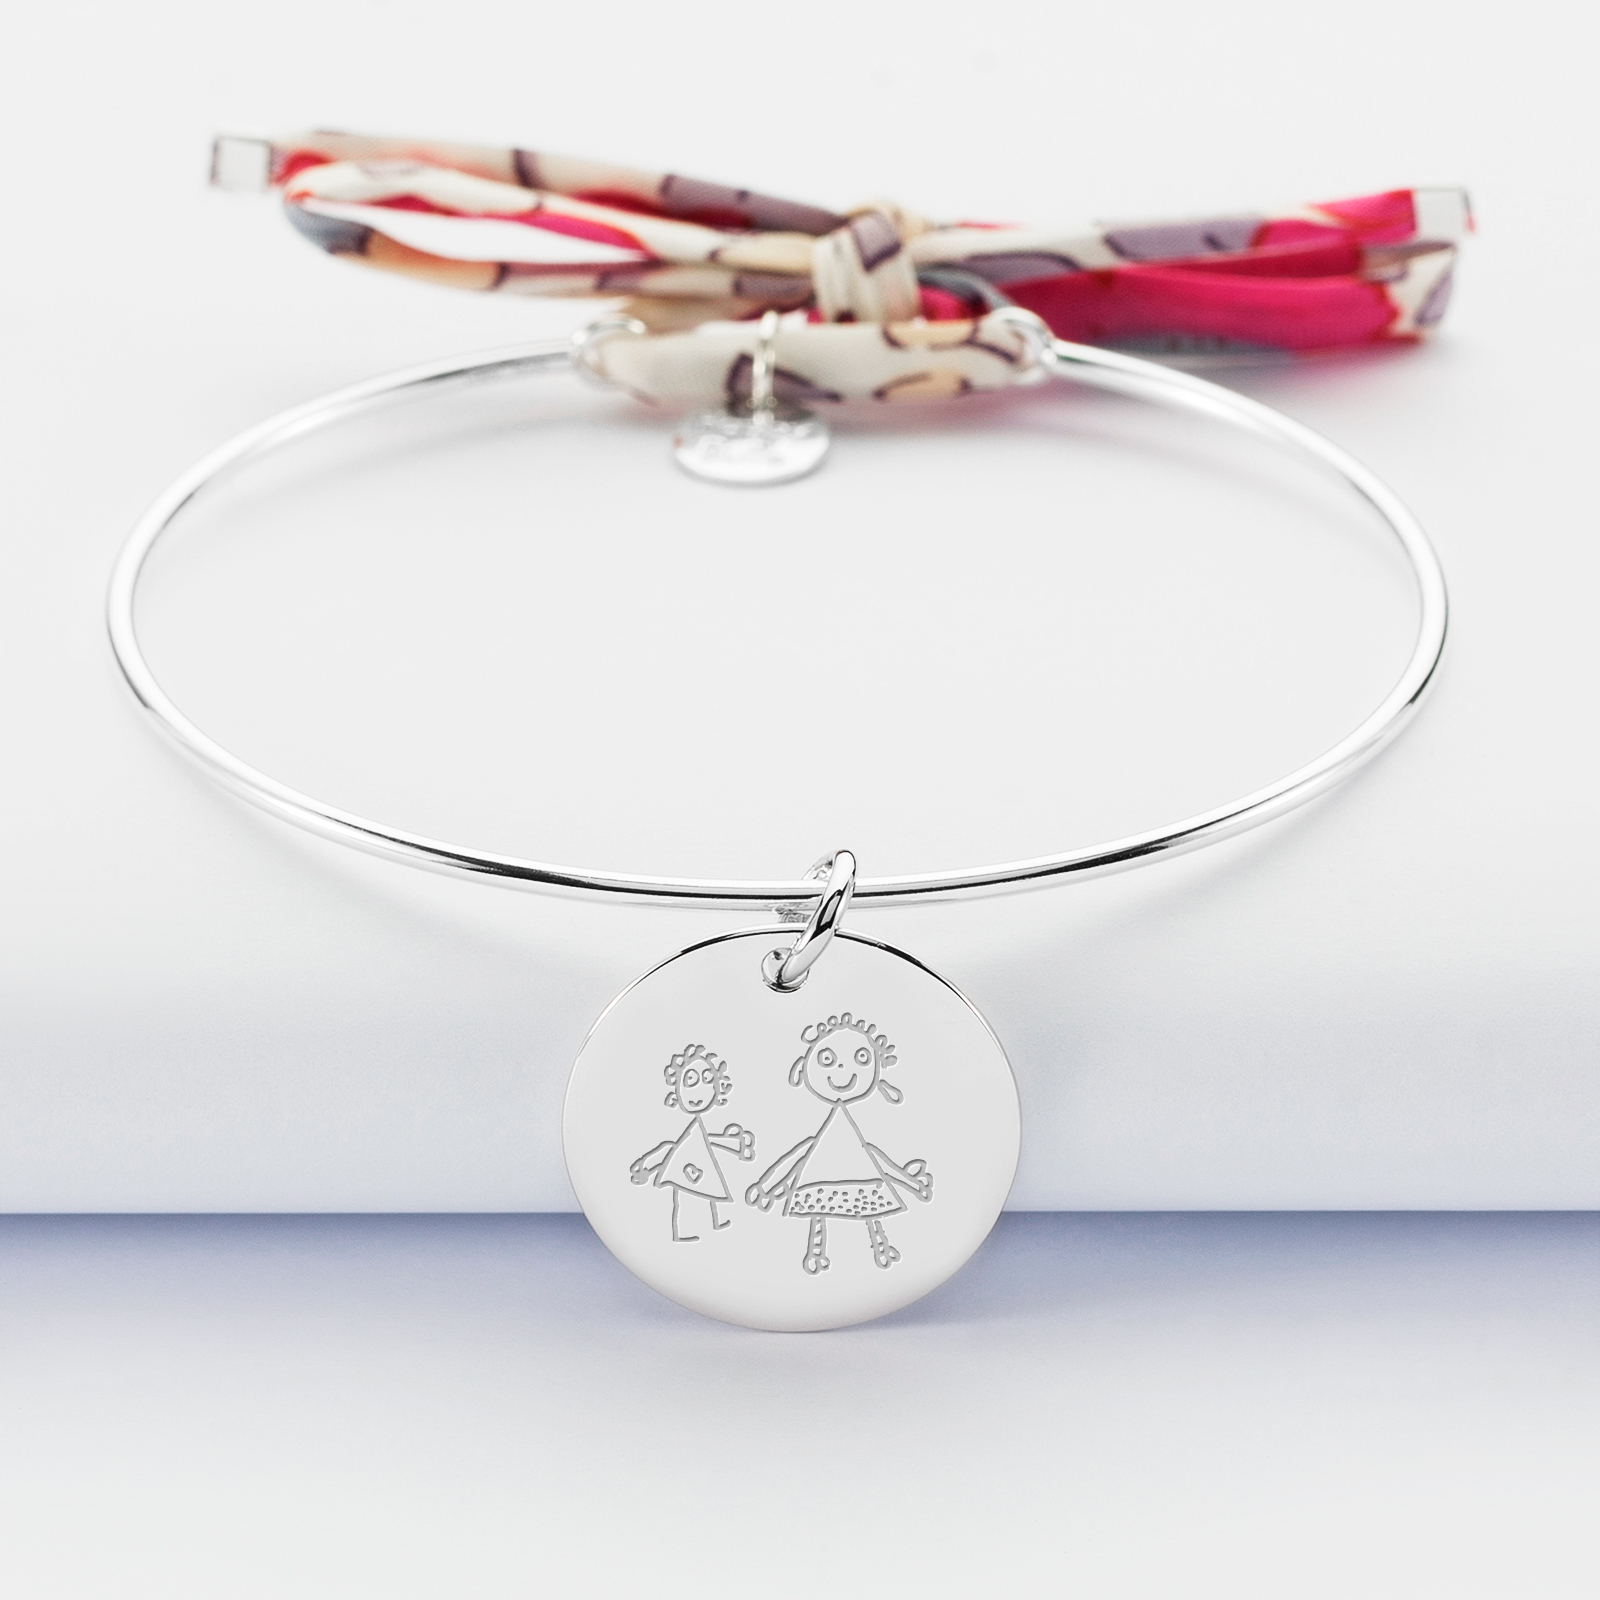 Personalised silver and Liberty cord bangle bracelet and 19 mm engraved medallion - sketch